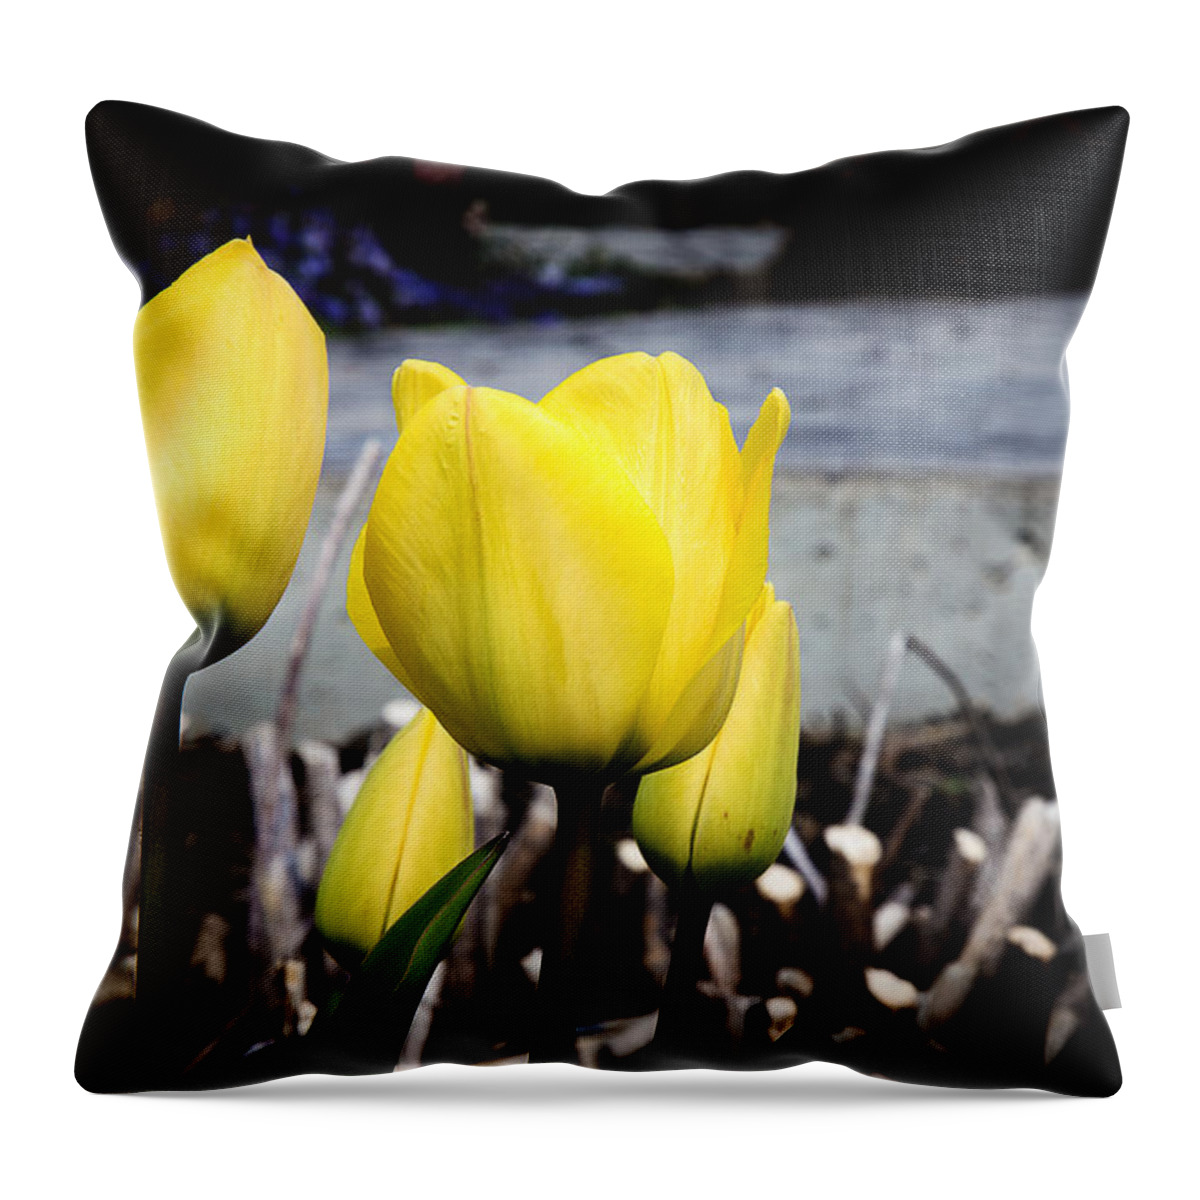 Tulip Throw Pillow featuring the photograph Yellow Tulips by Milena Ilieva